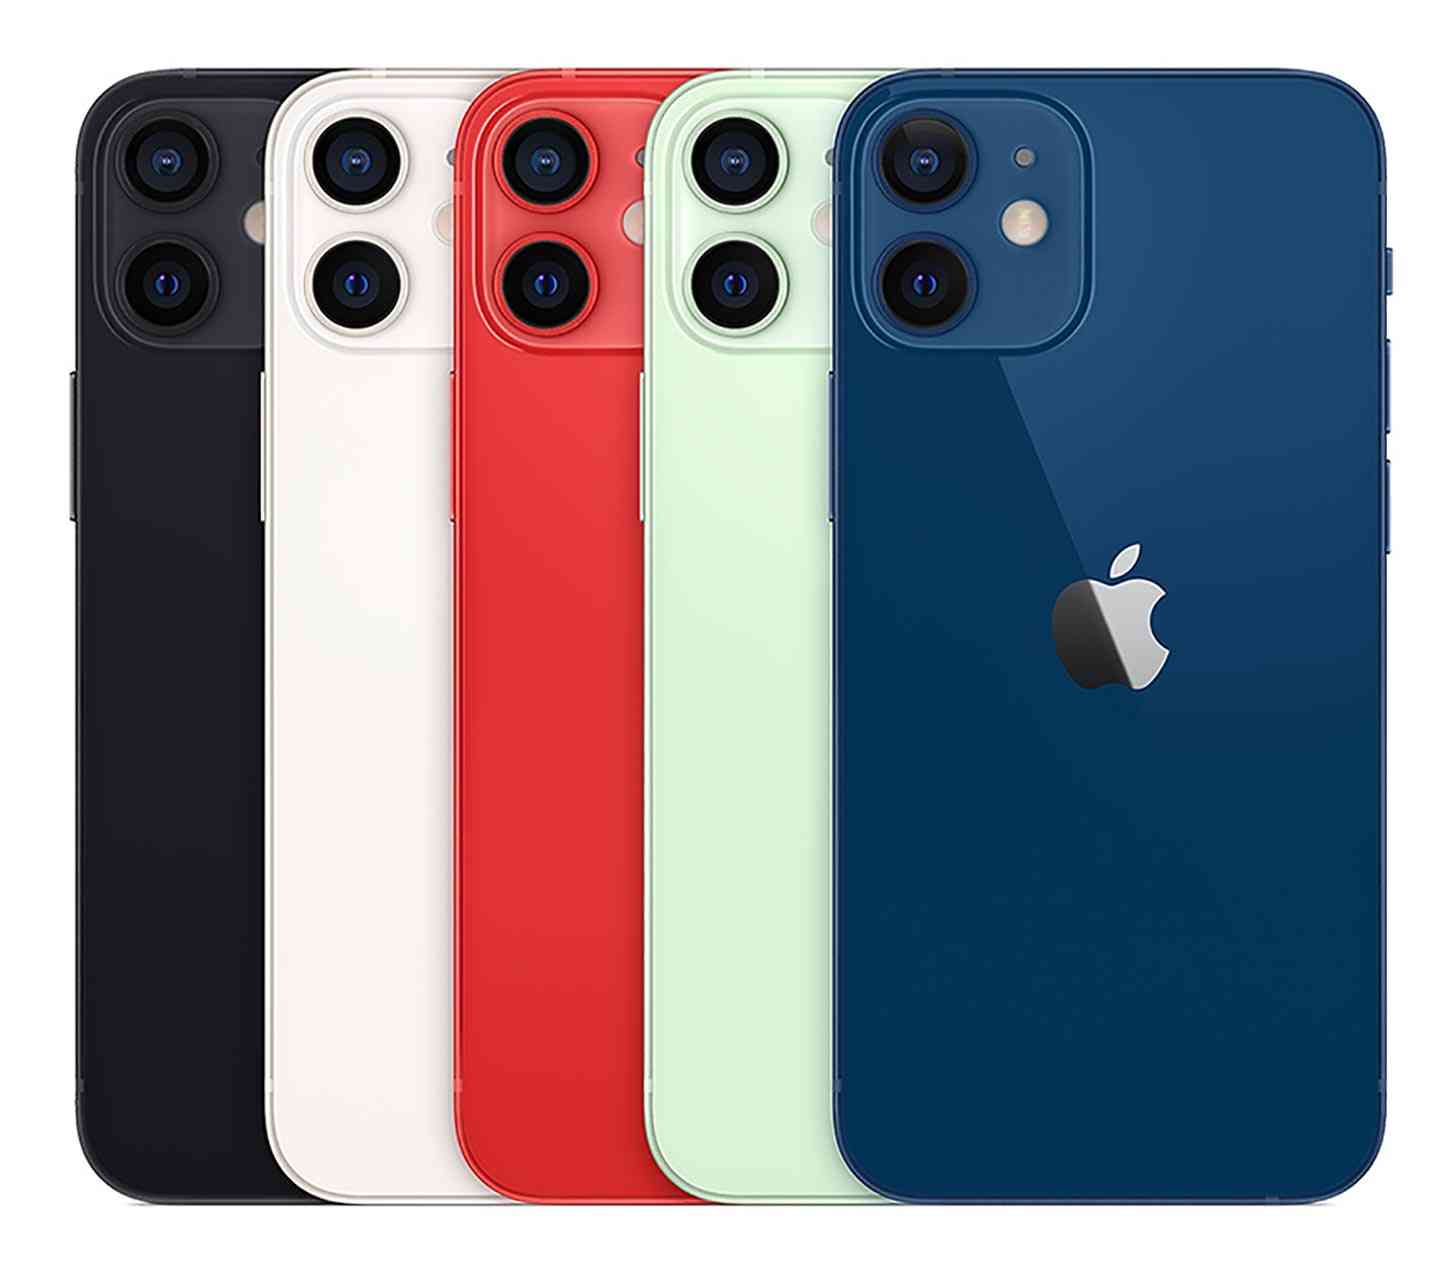 iPhone 12 mini colors official